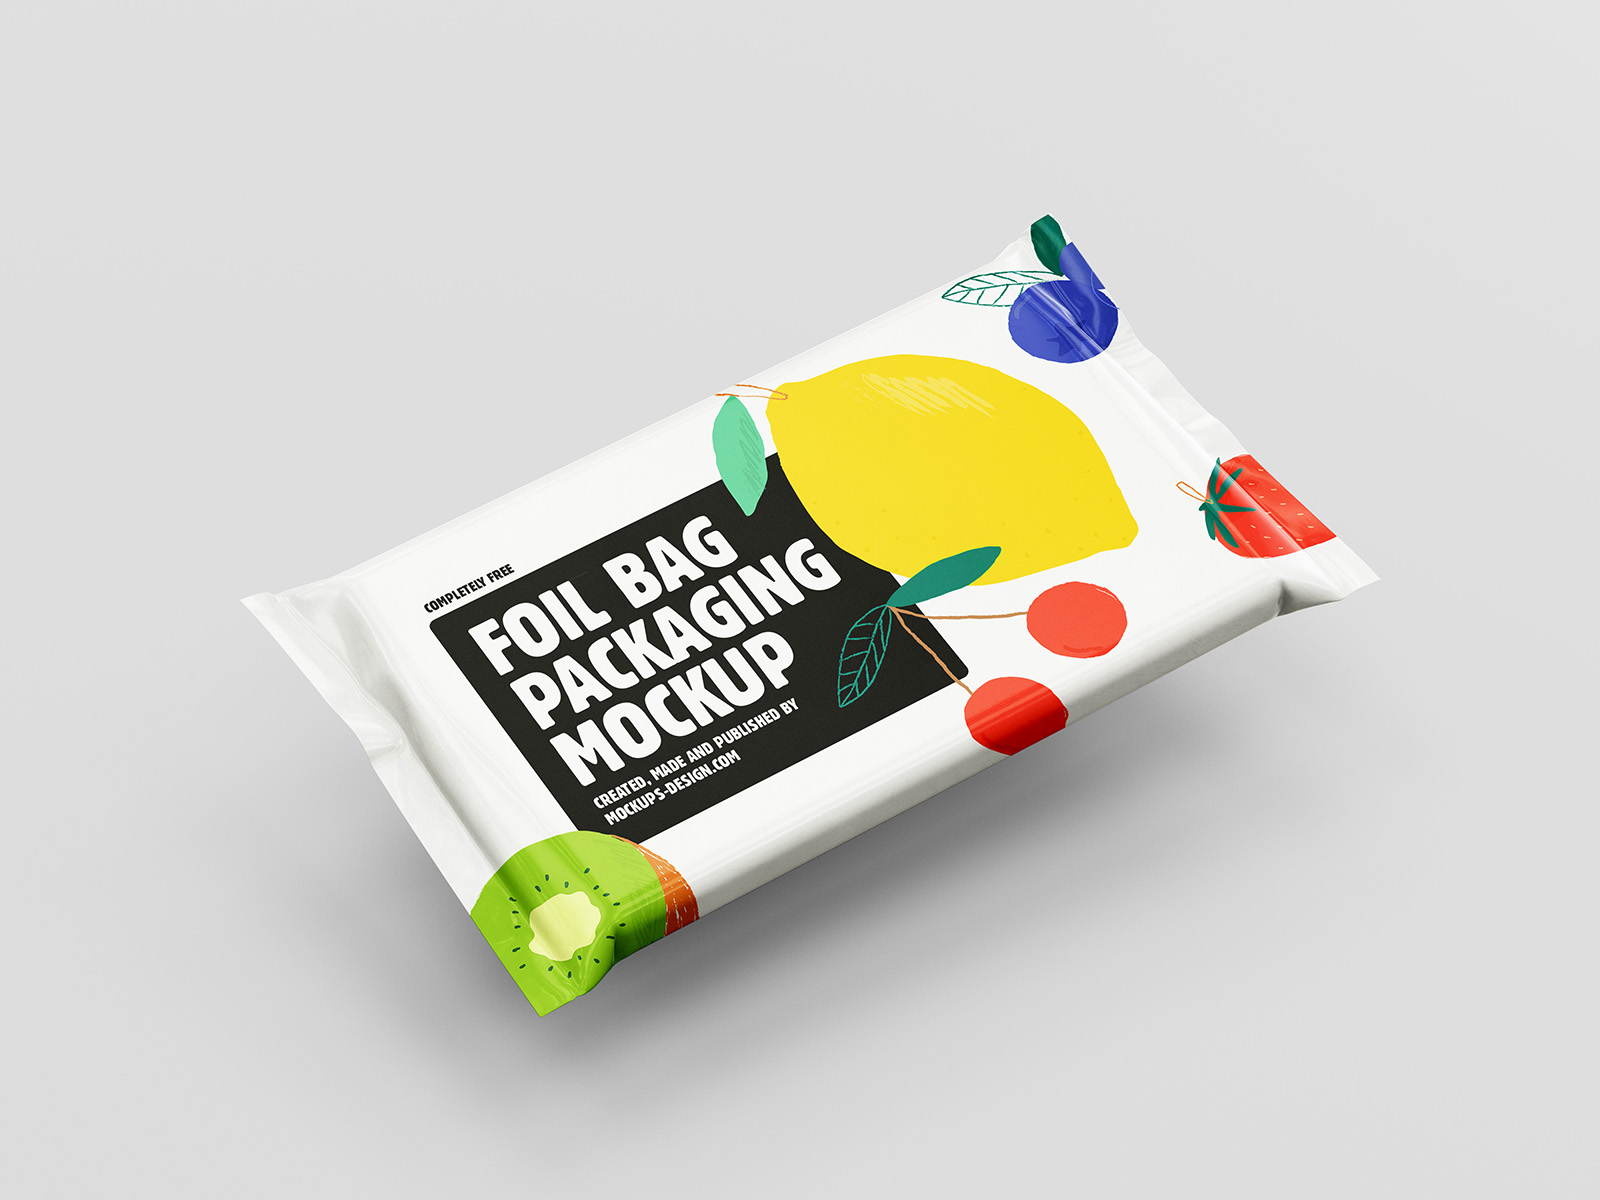 Food pouch mockup